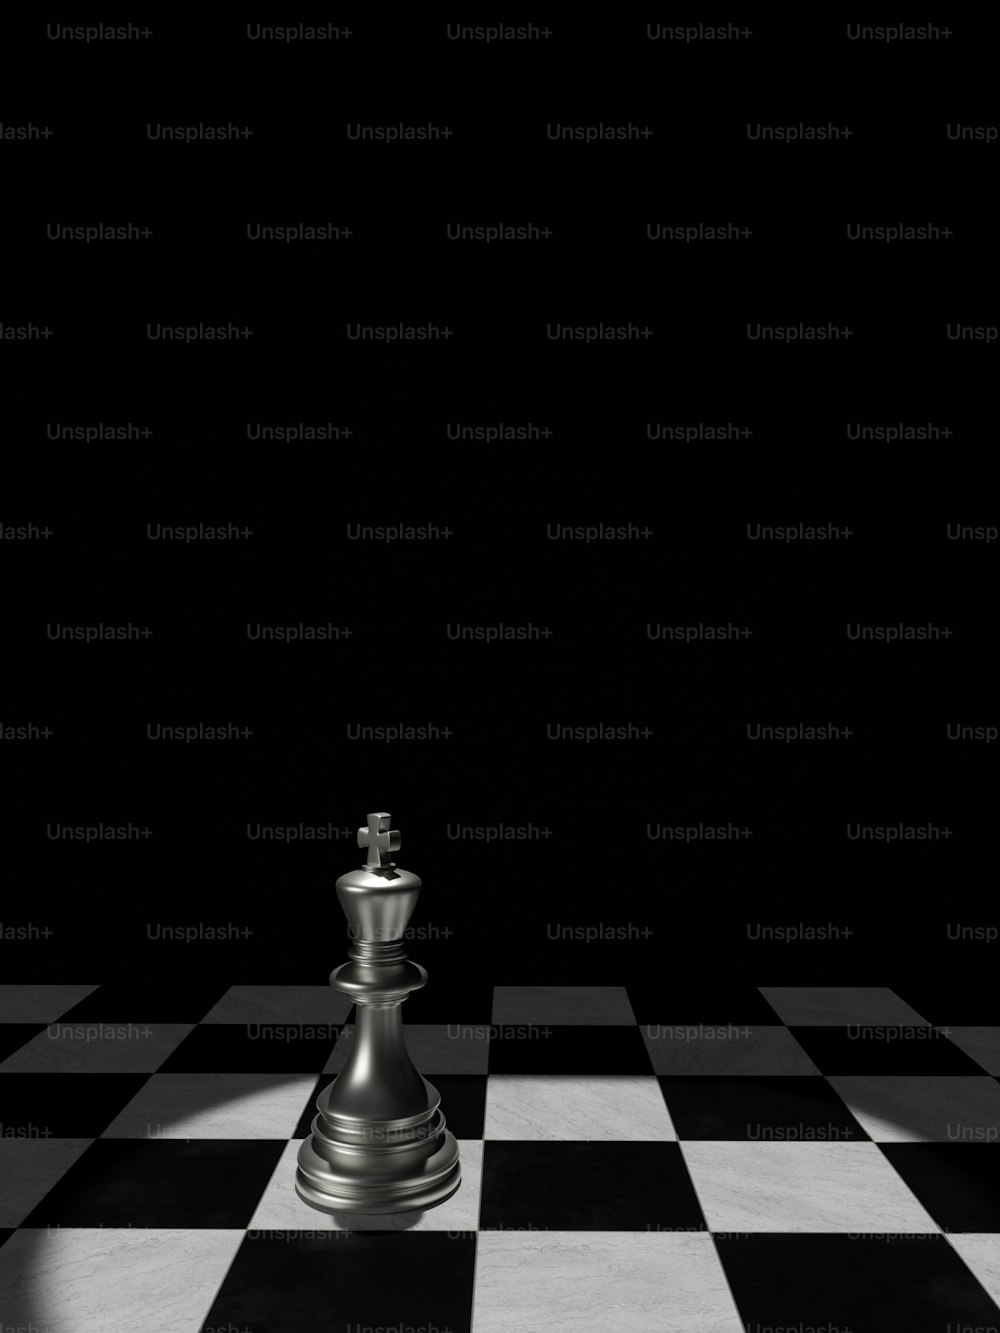 Chessboard With Chess Pieces Side View 3d Rendering Illustration Stock  Photo - Download Image Now - iStock